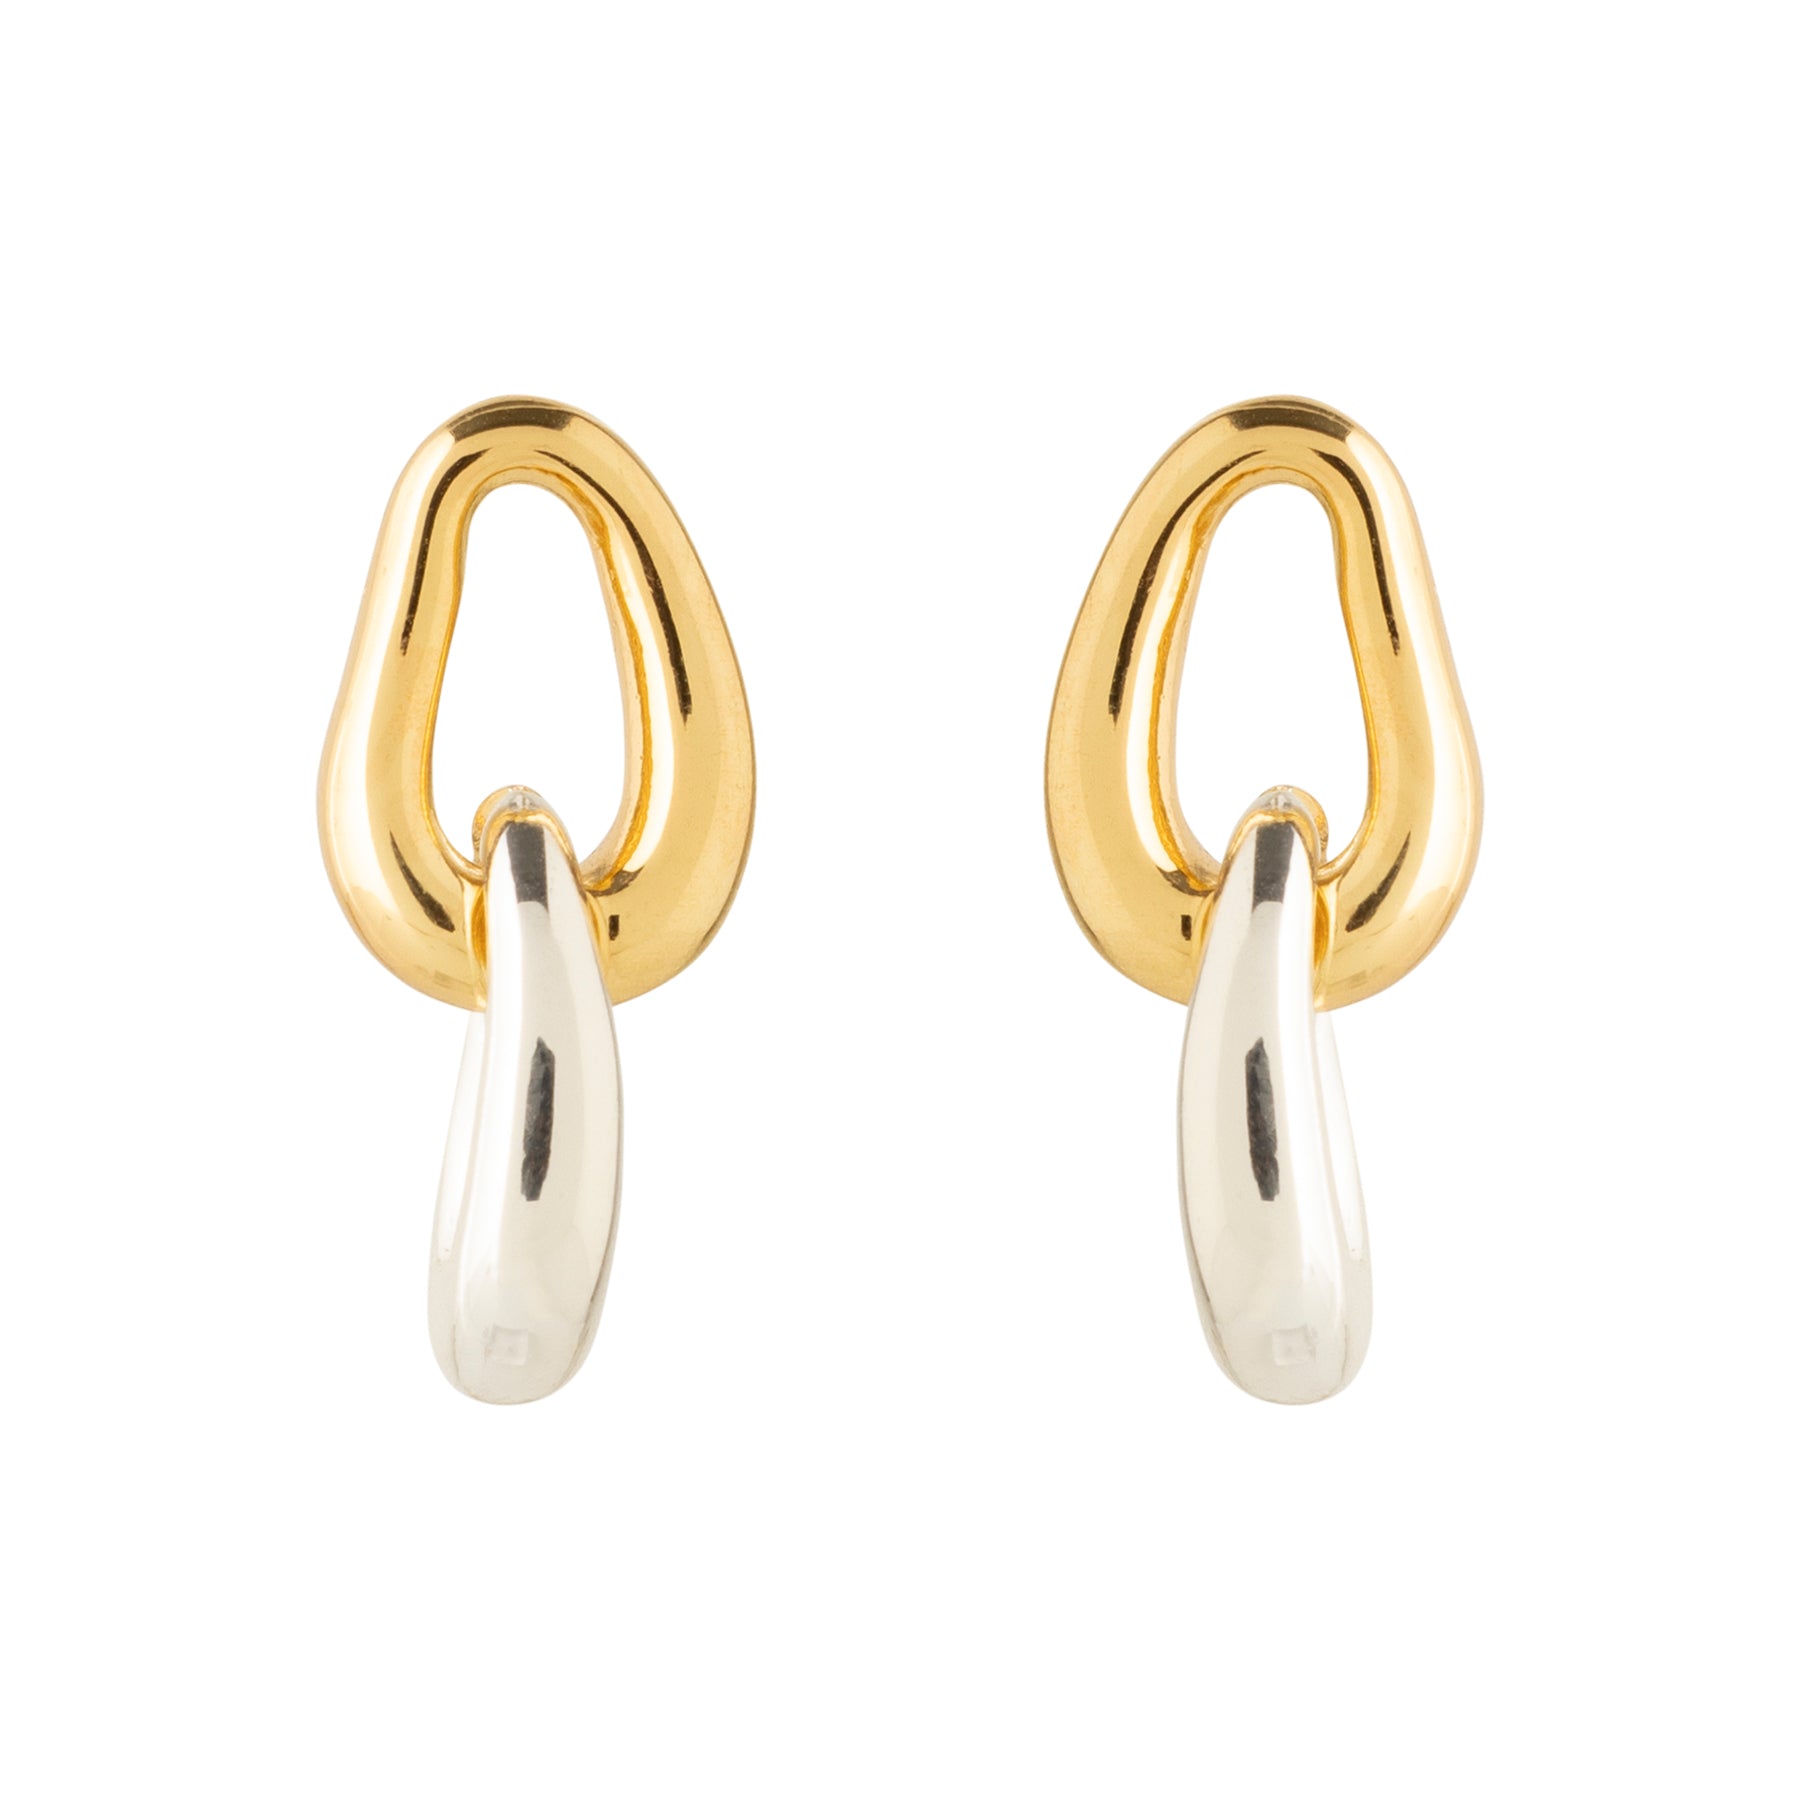 Gold and Silver Drop Earrings on White Background